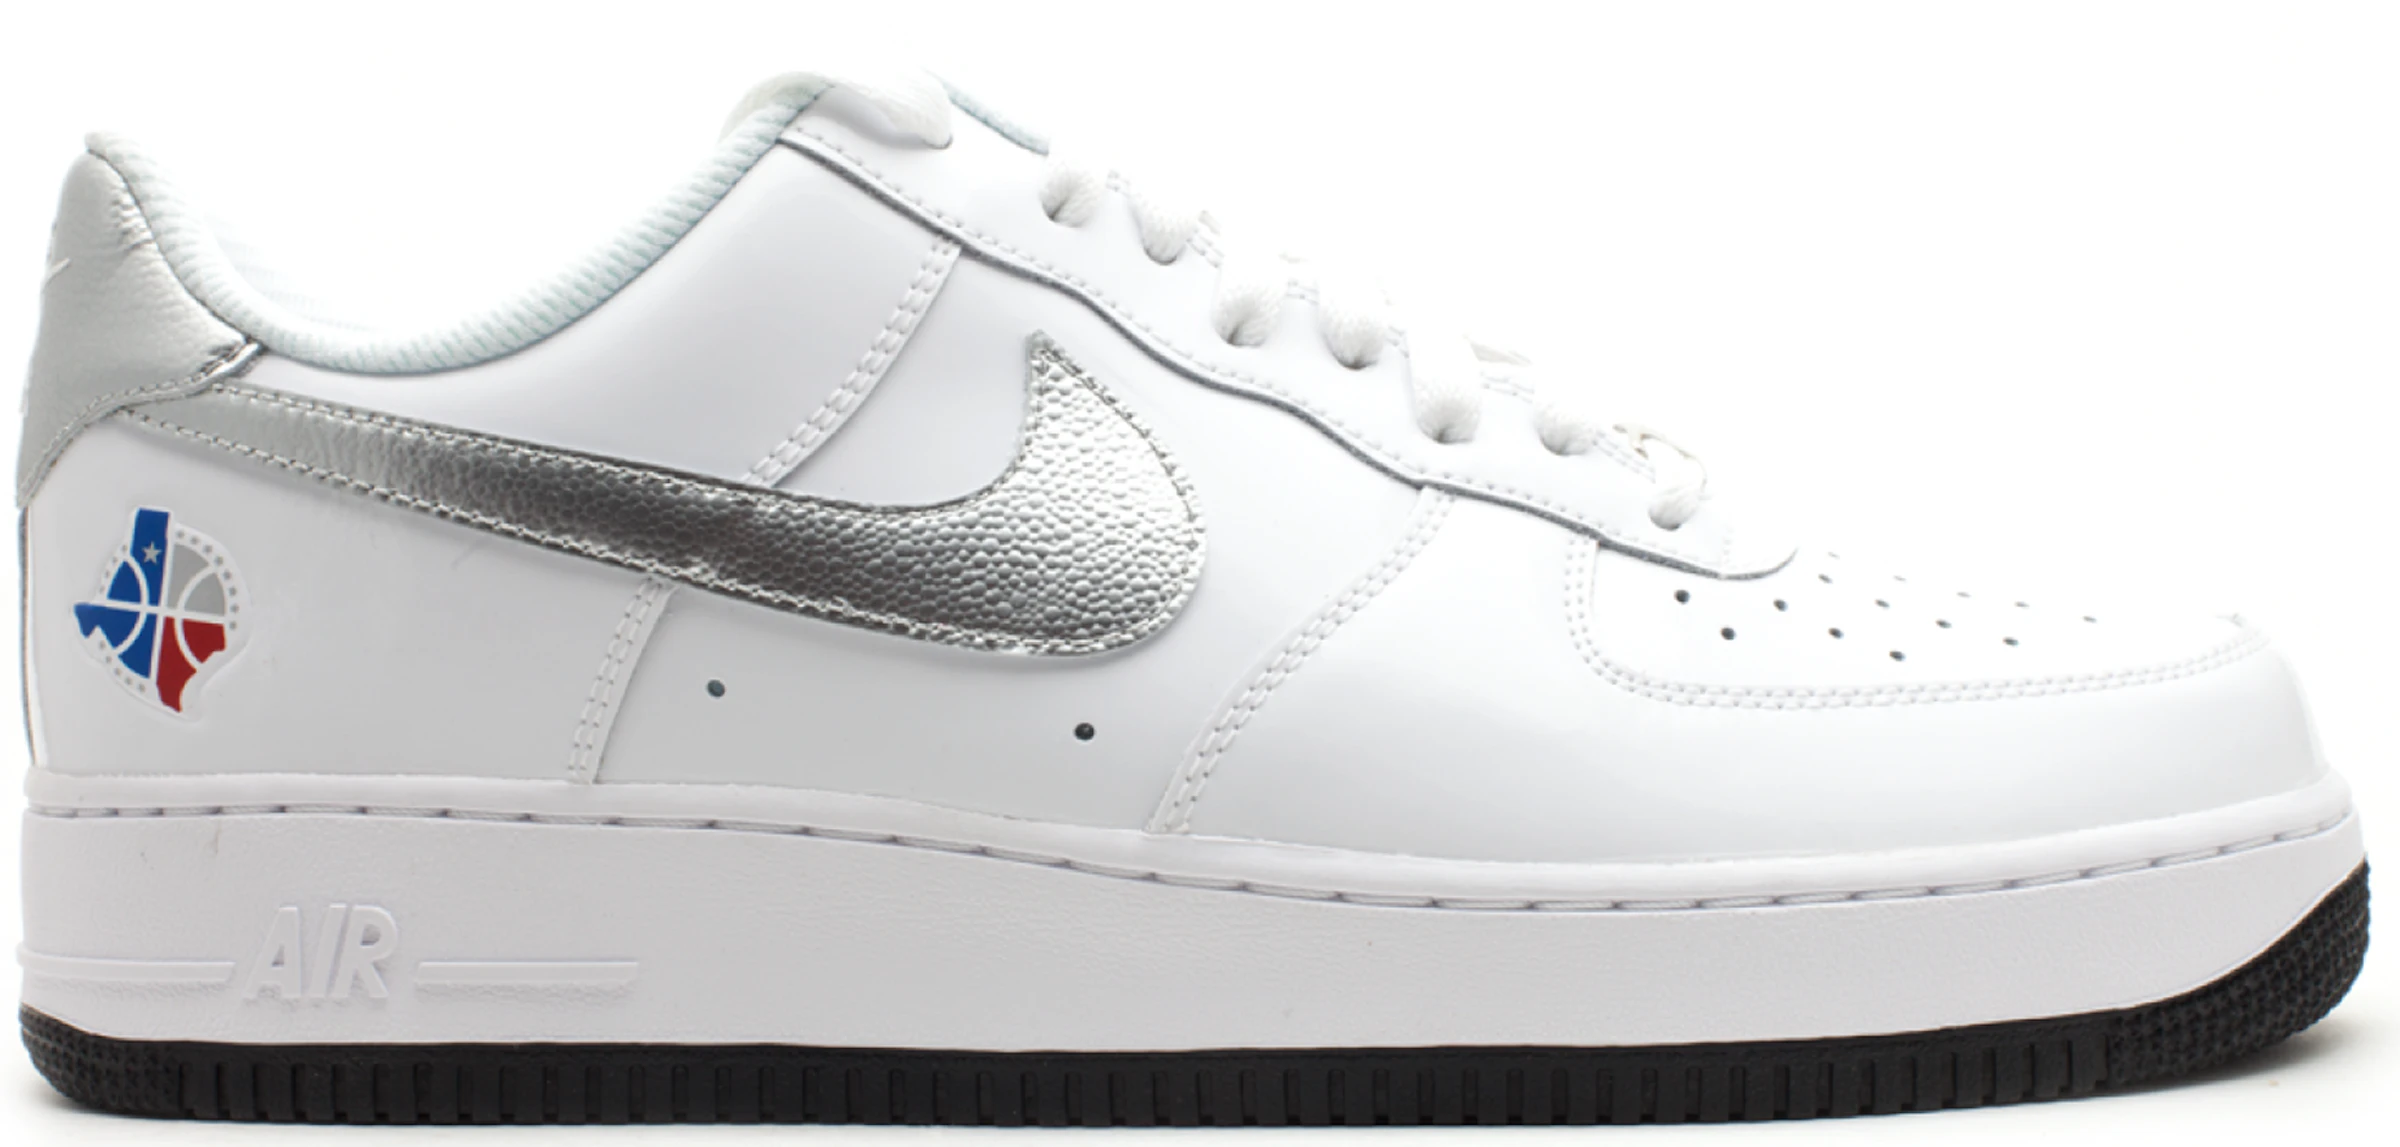 Force 1 Low All-Star White (2010) - 315122-120 ES